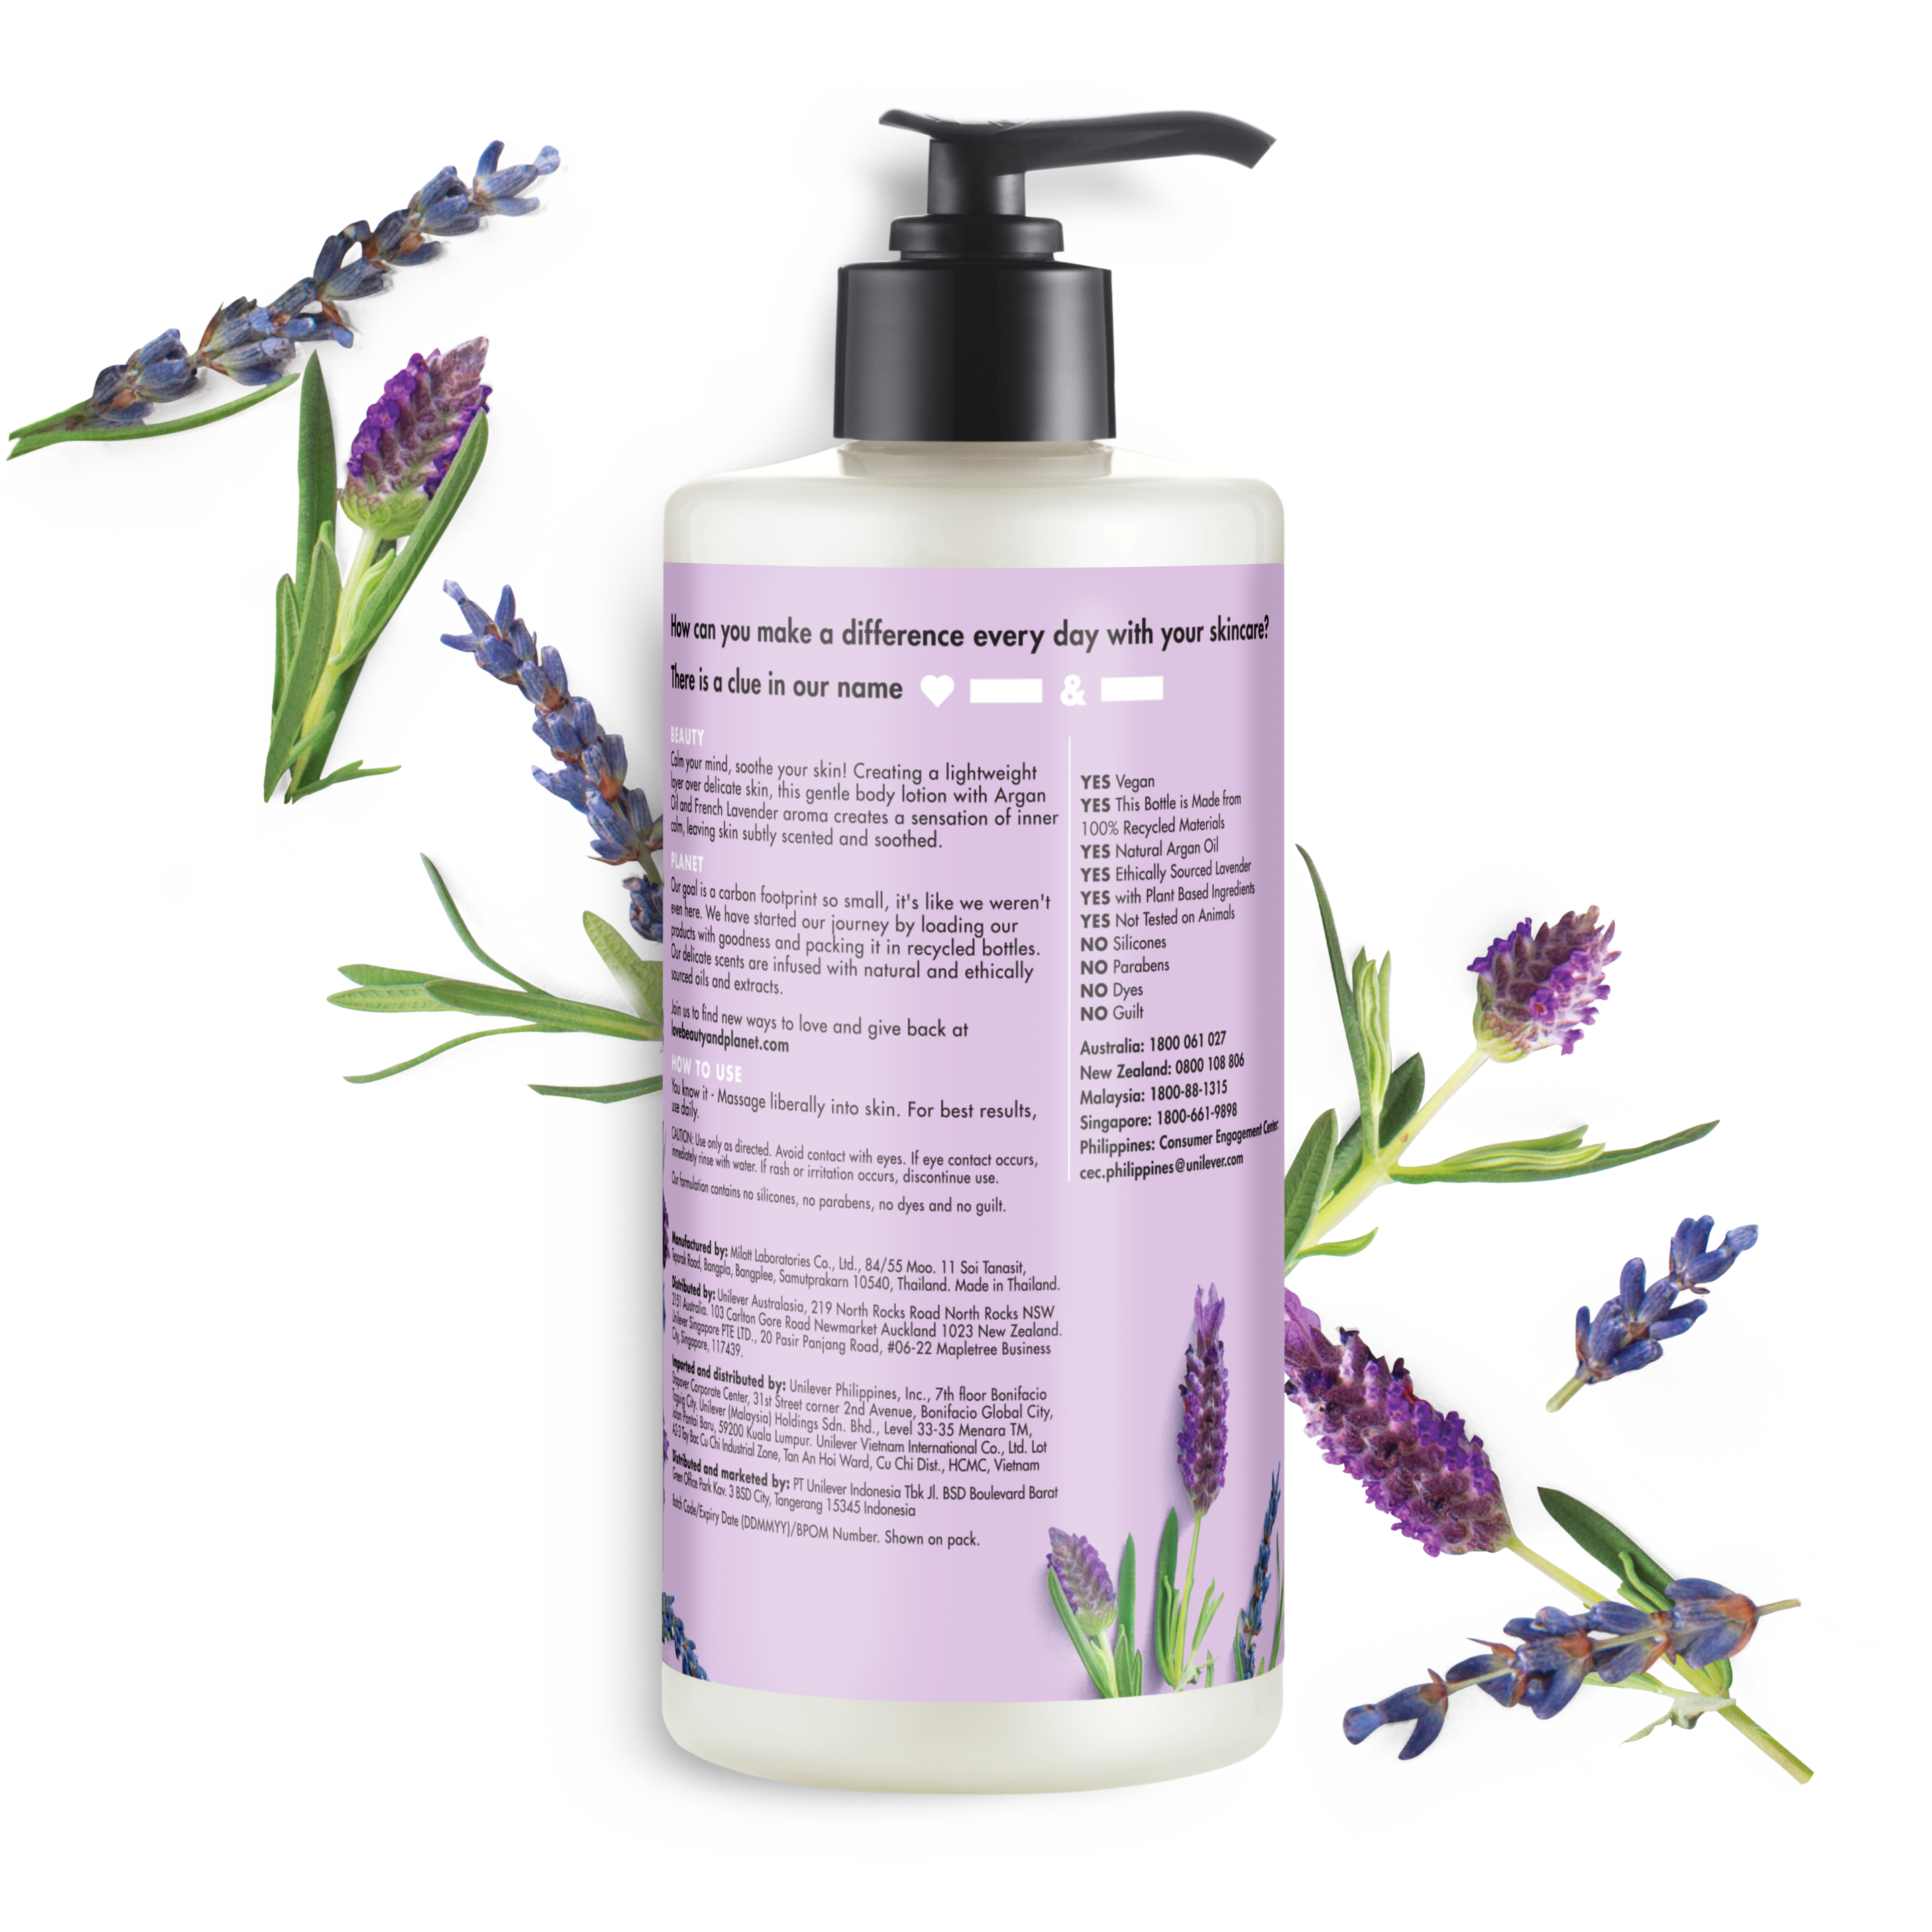 Back of body lotion pack Love Beauty and Planet Argan Oil & Lavender Body Lotion Argan Oil & Lavender Soothe & Serene 13.5ml